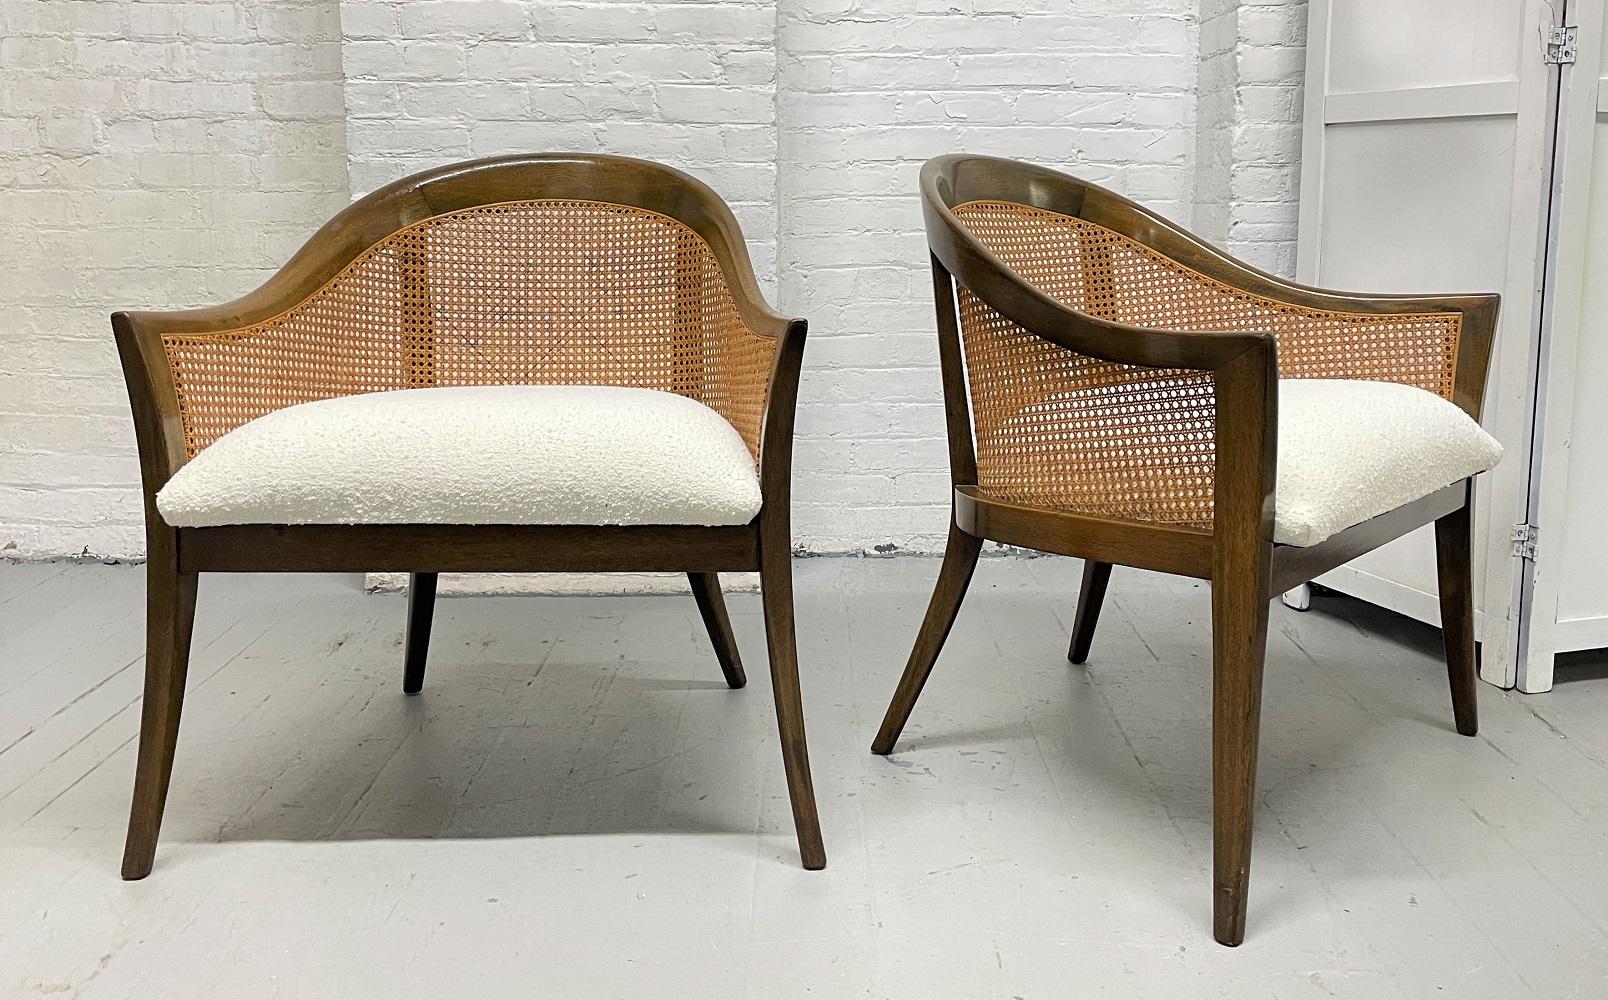 Pair of Harvey Probber side or lounge chairs. The chairs have mahogany and caned frames, splayed legs with a cushioned seat done in Bouclé. Mid-Century Modern.